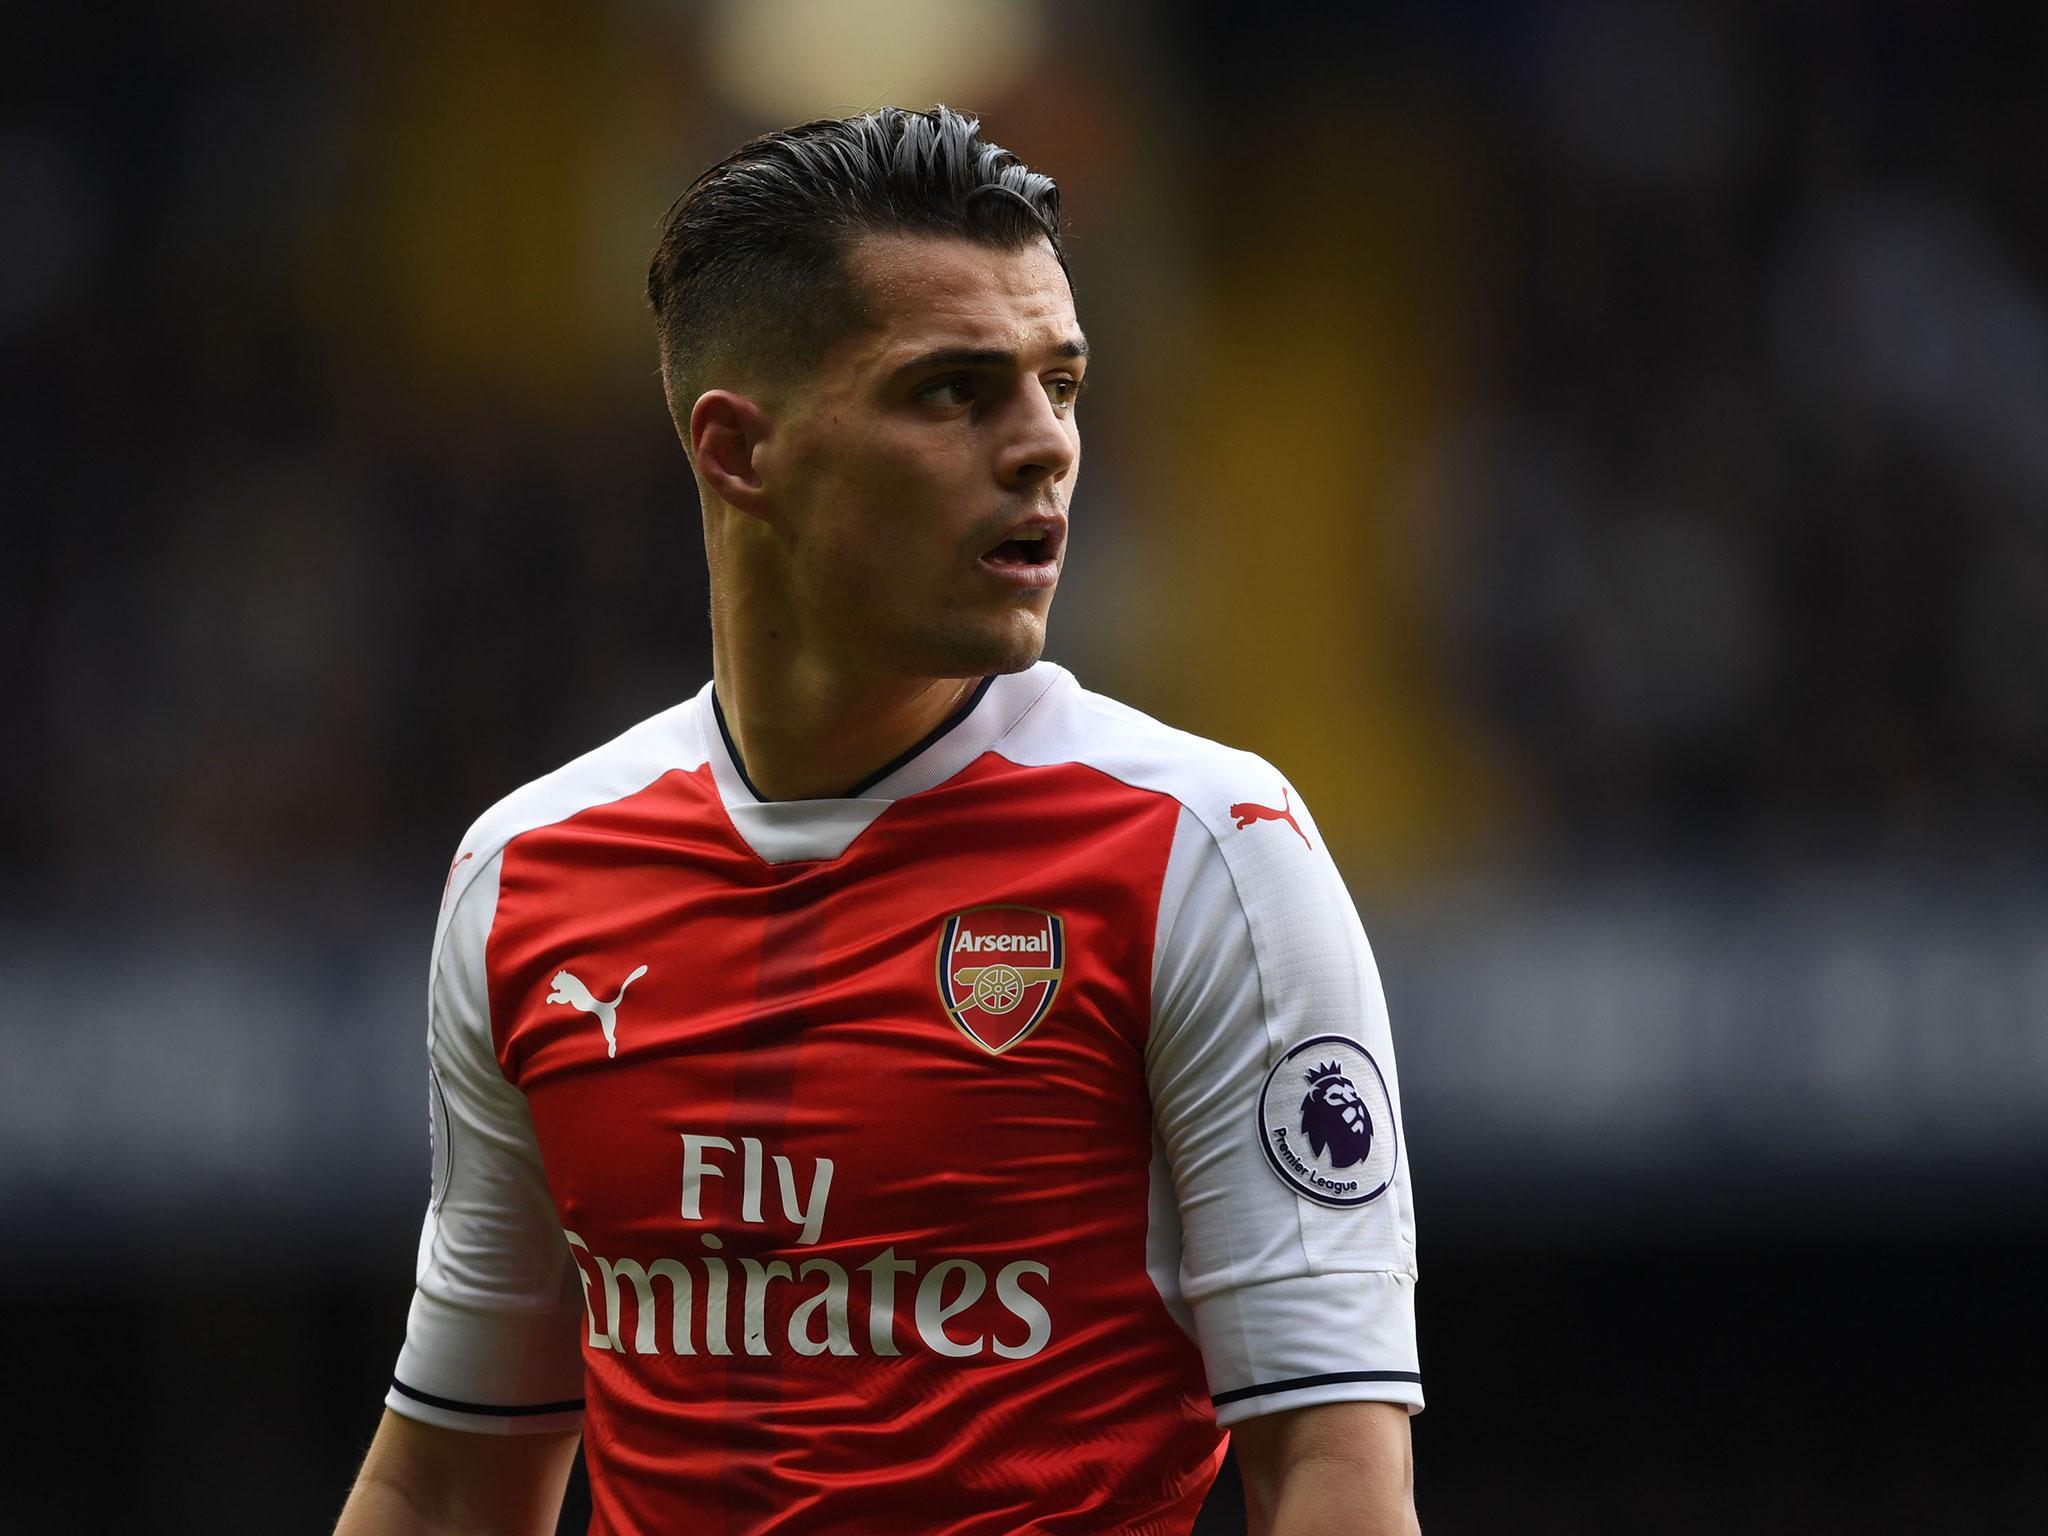 Granit Xhaka will miss the game with Manchester United